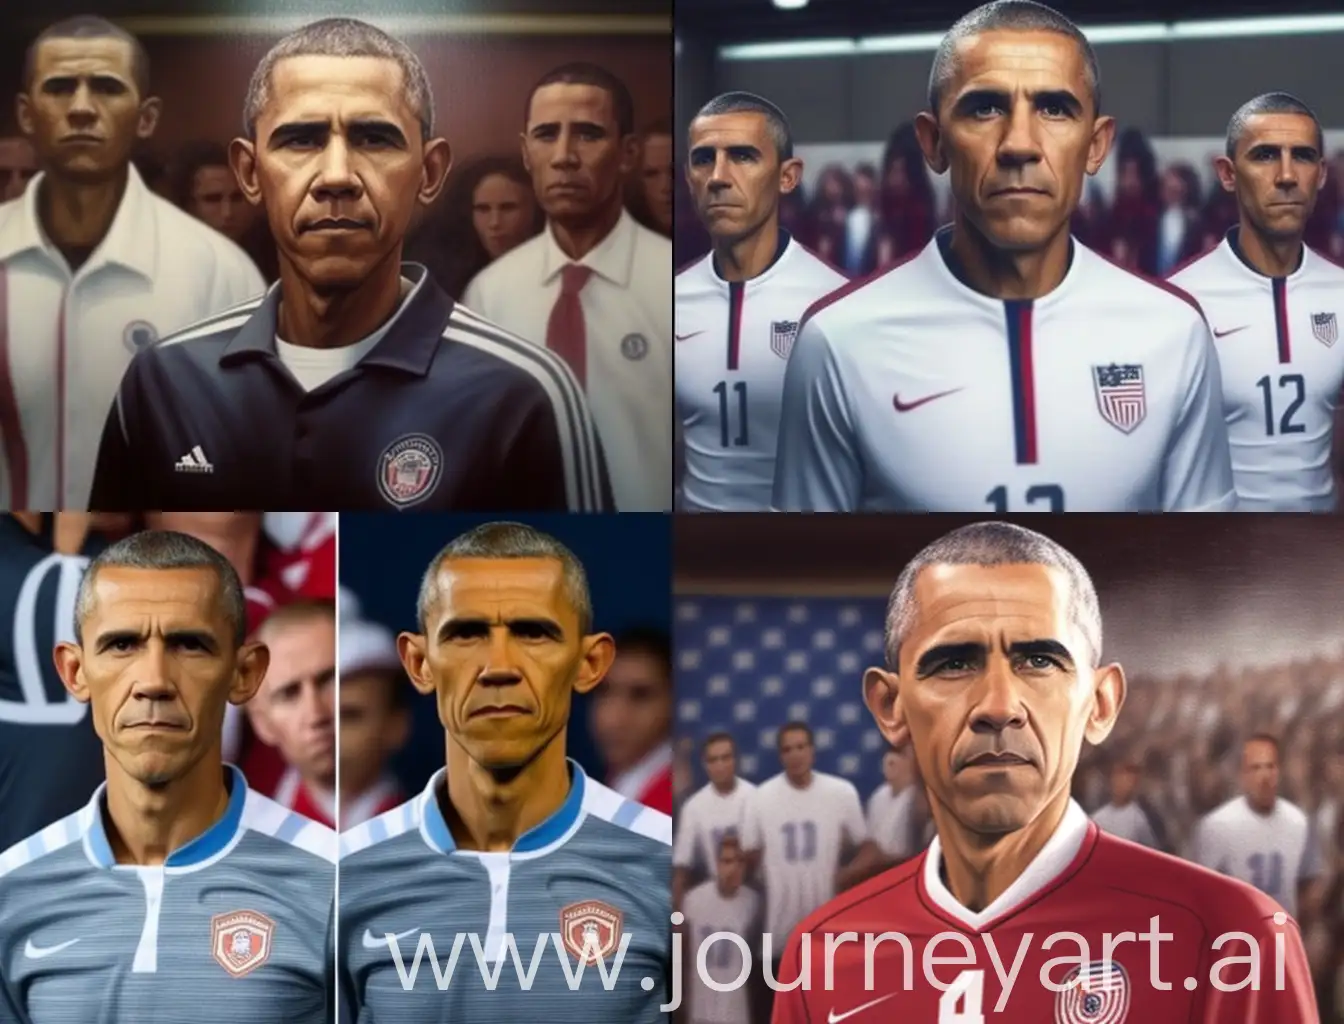 Obama wearing the sports kit of the American national team in the football stadium, pay attention to the details of the face, inside the stadium, Obama is facing the camera, realistic, pay attention to the details of Obama's face, realistic , full body, looking at the camera 